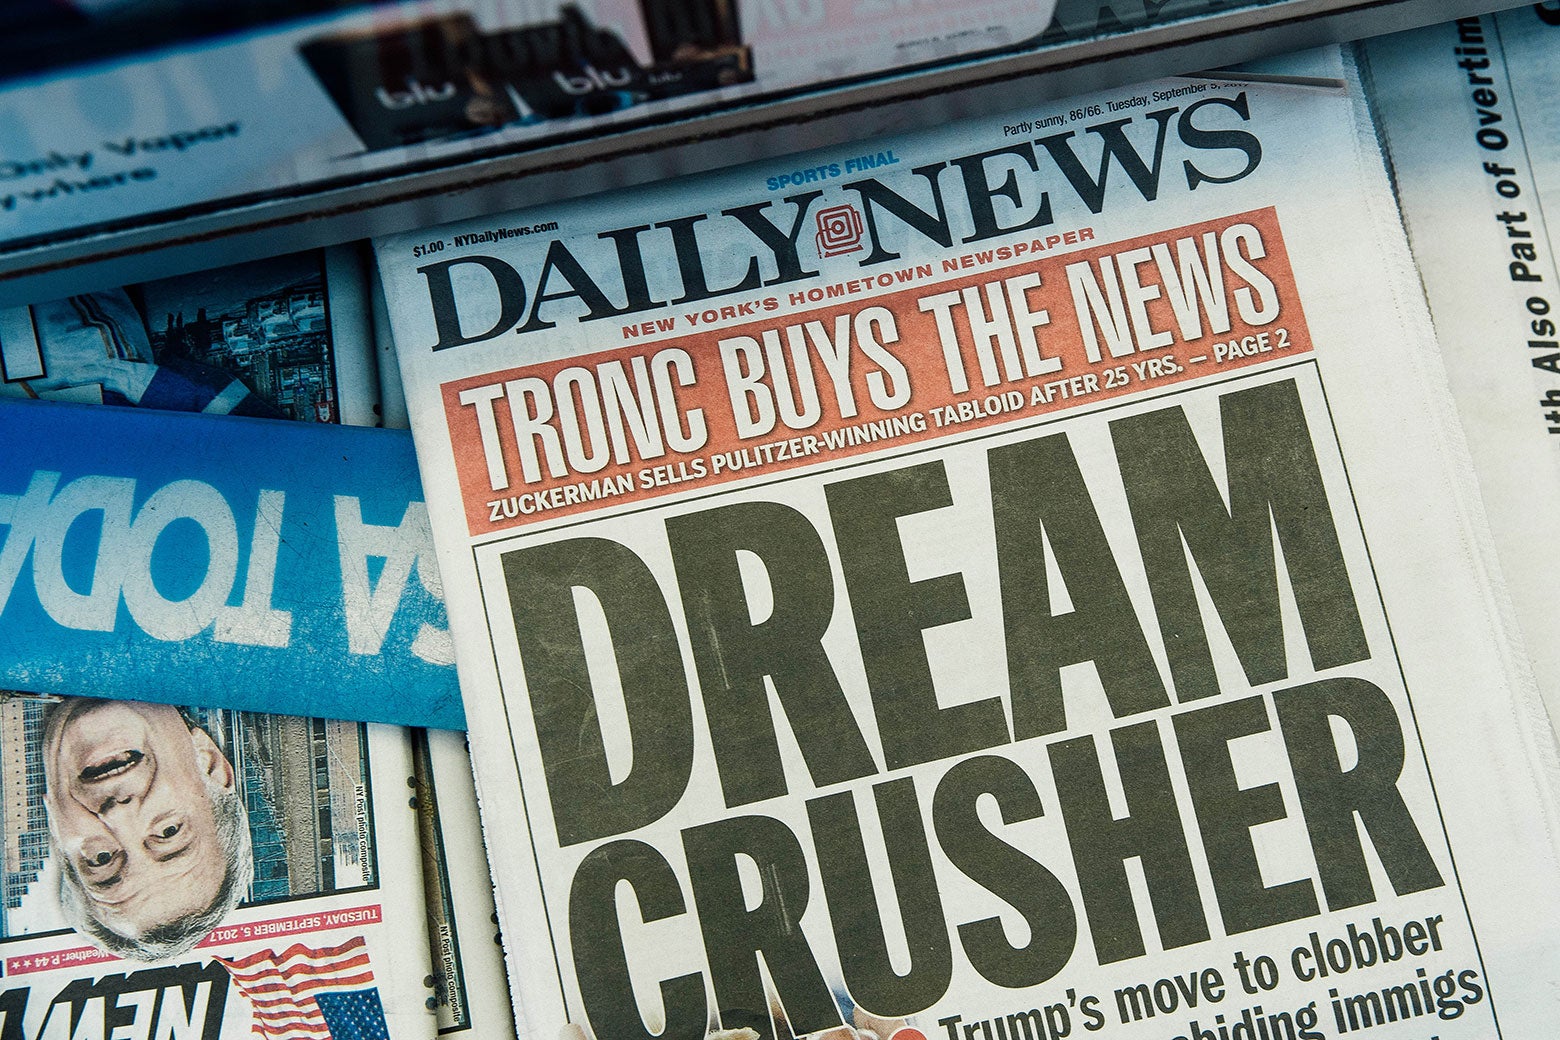 A newsstand copy of the New York Daily News announces the paper's sale to Tronc: "TRONC BUYS THE NEWS."